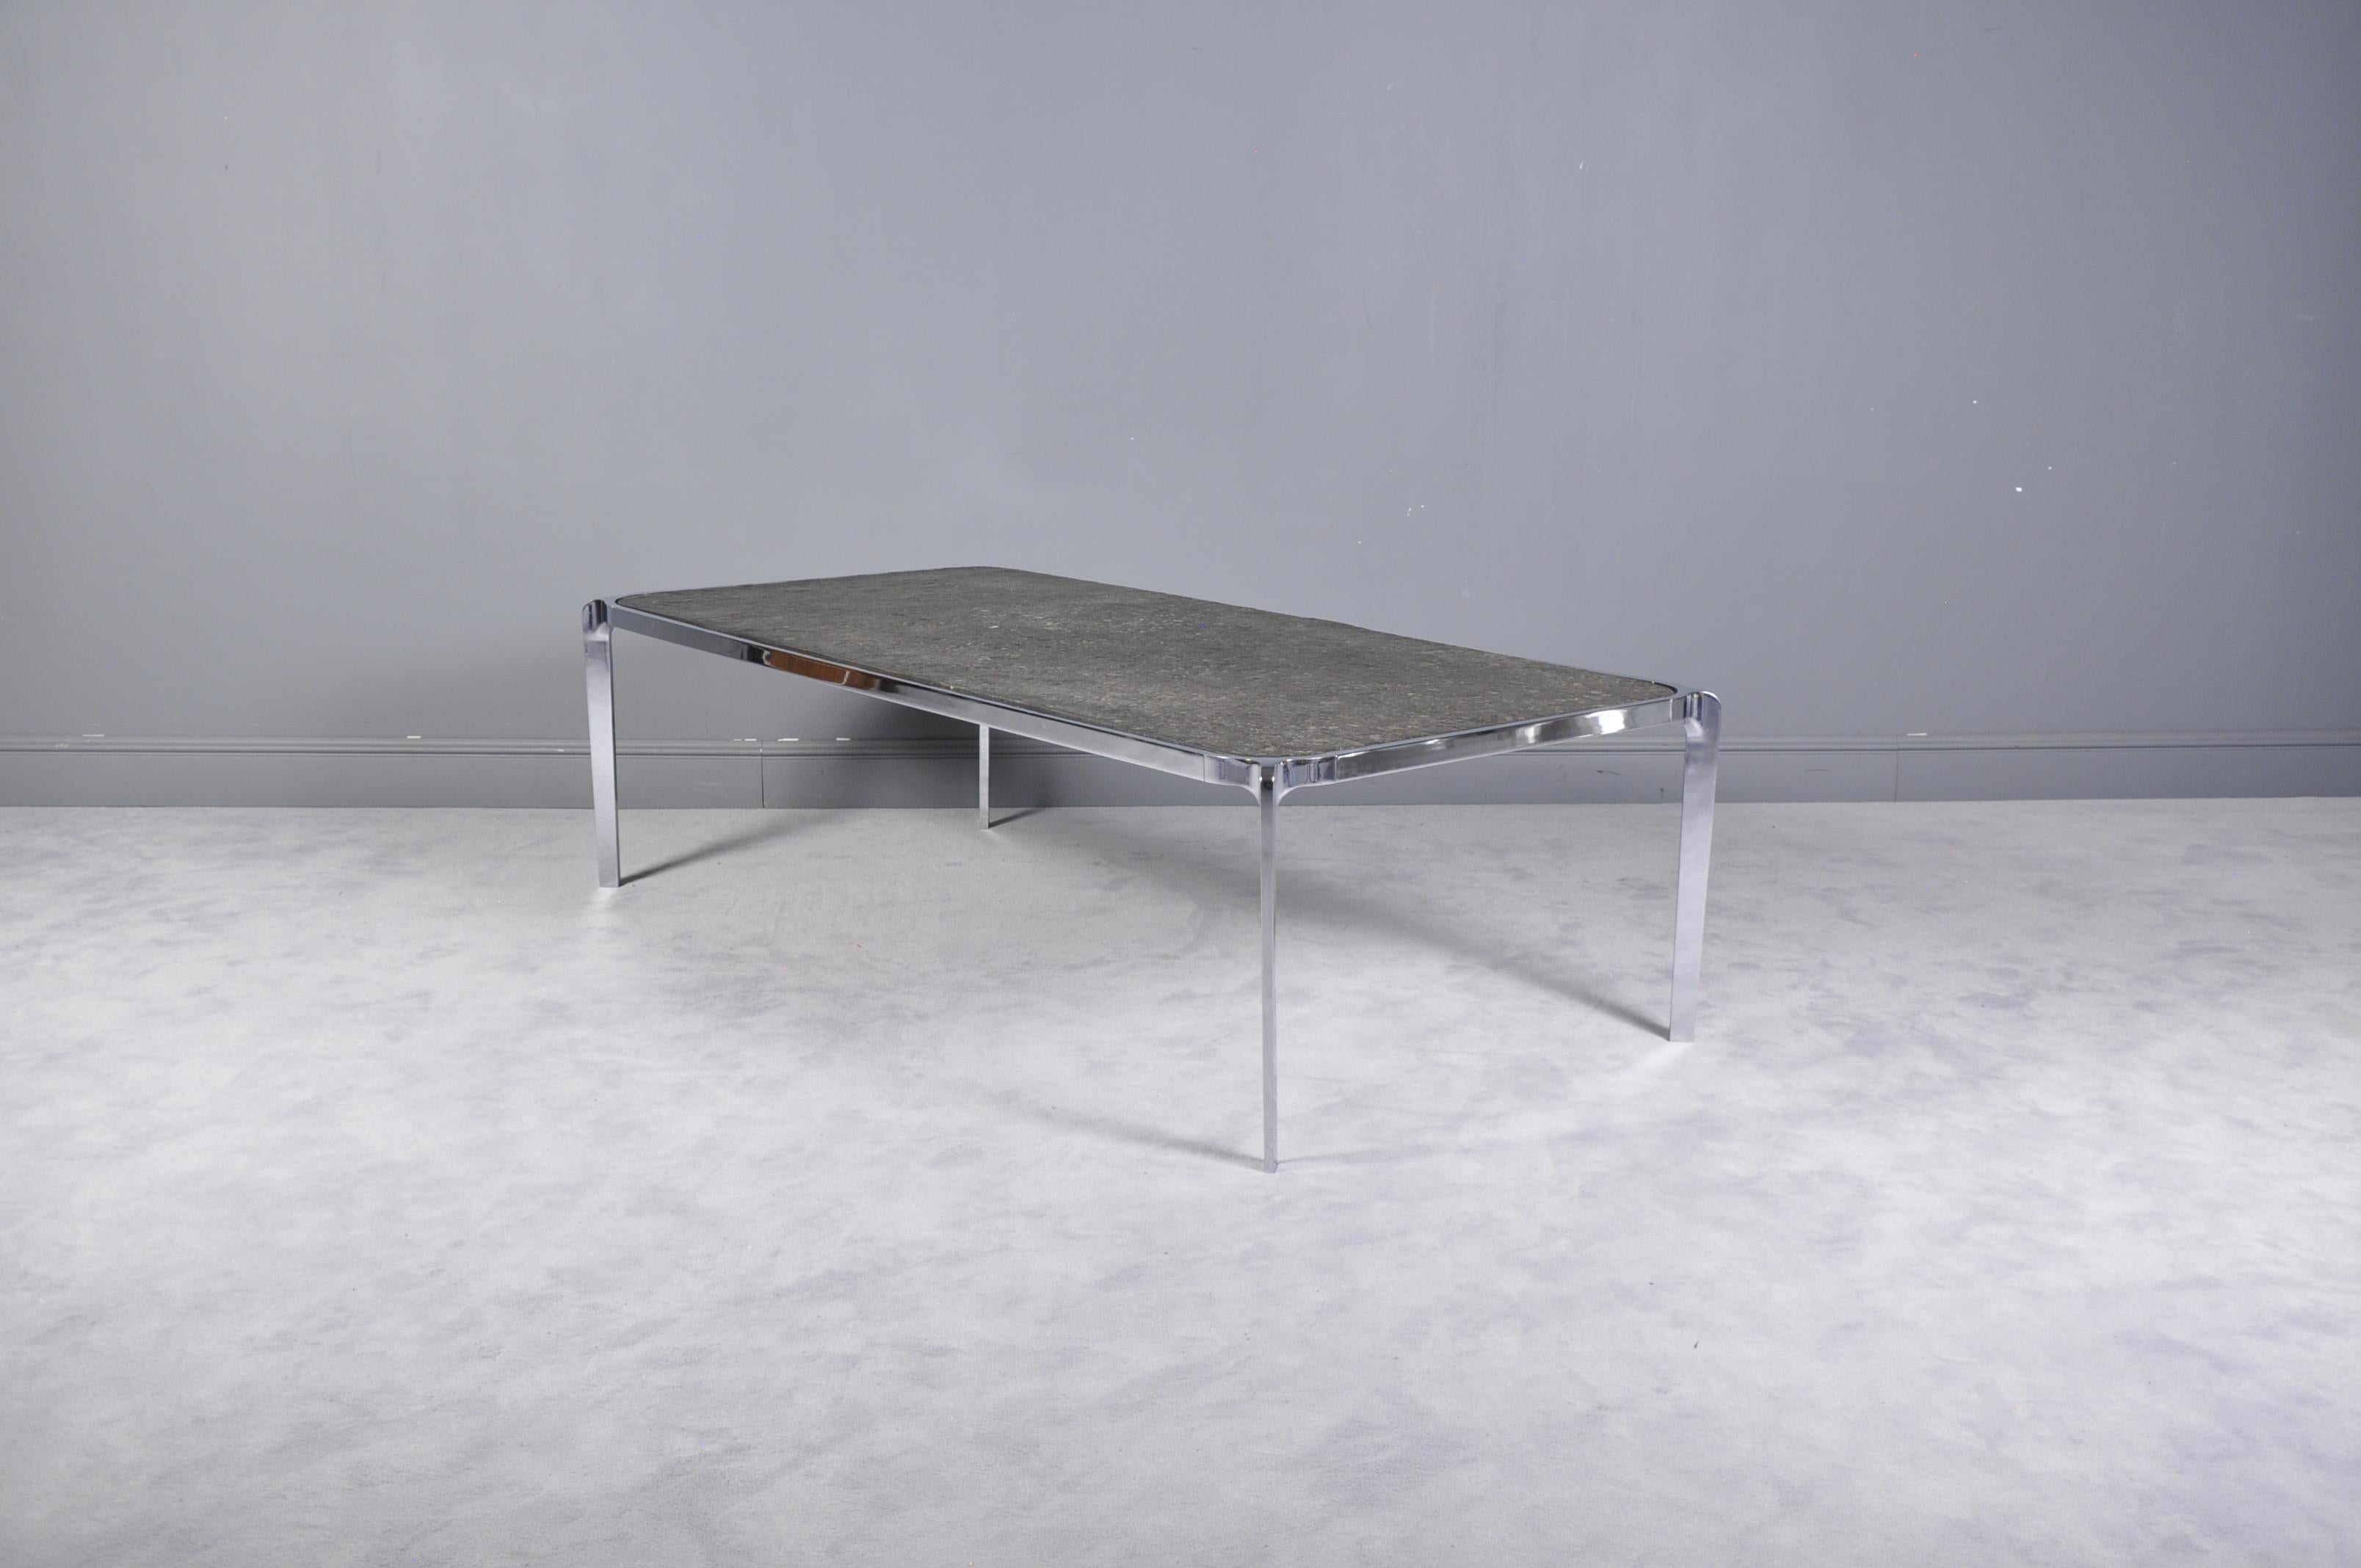 This gorgeous vintage modern coffee table features a rectangular granite top and a heavy chrome frame. This elegant vintage modern cocktail table makes the perfect addition to any home, business, or office.